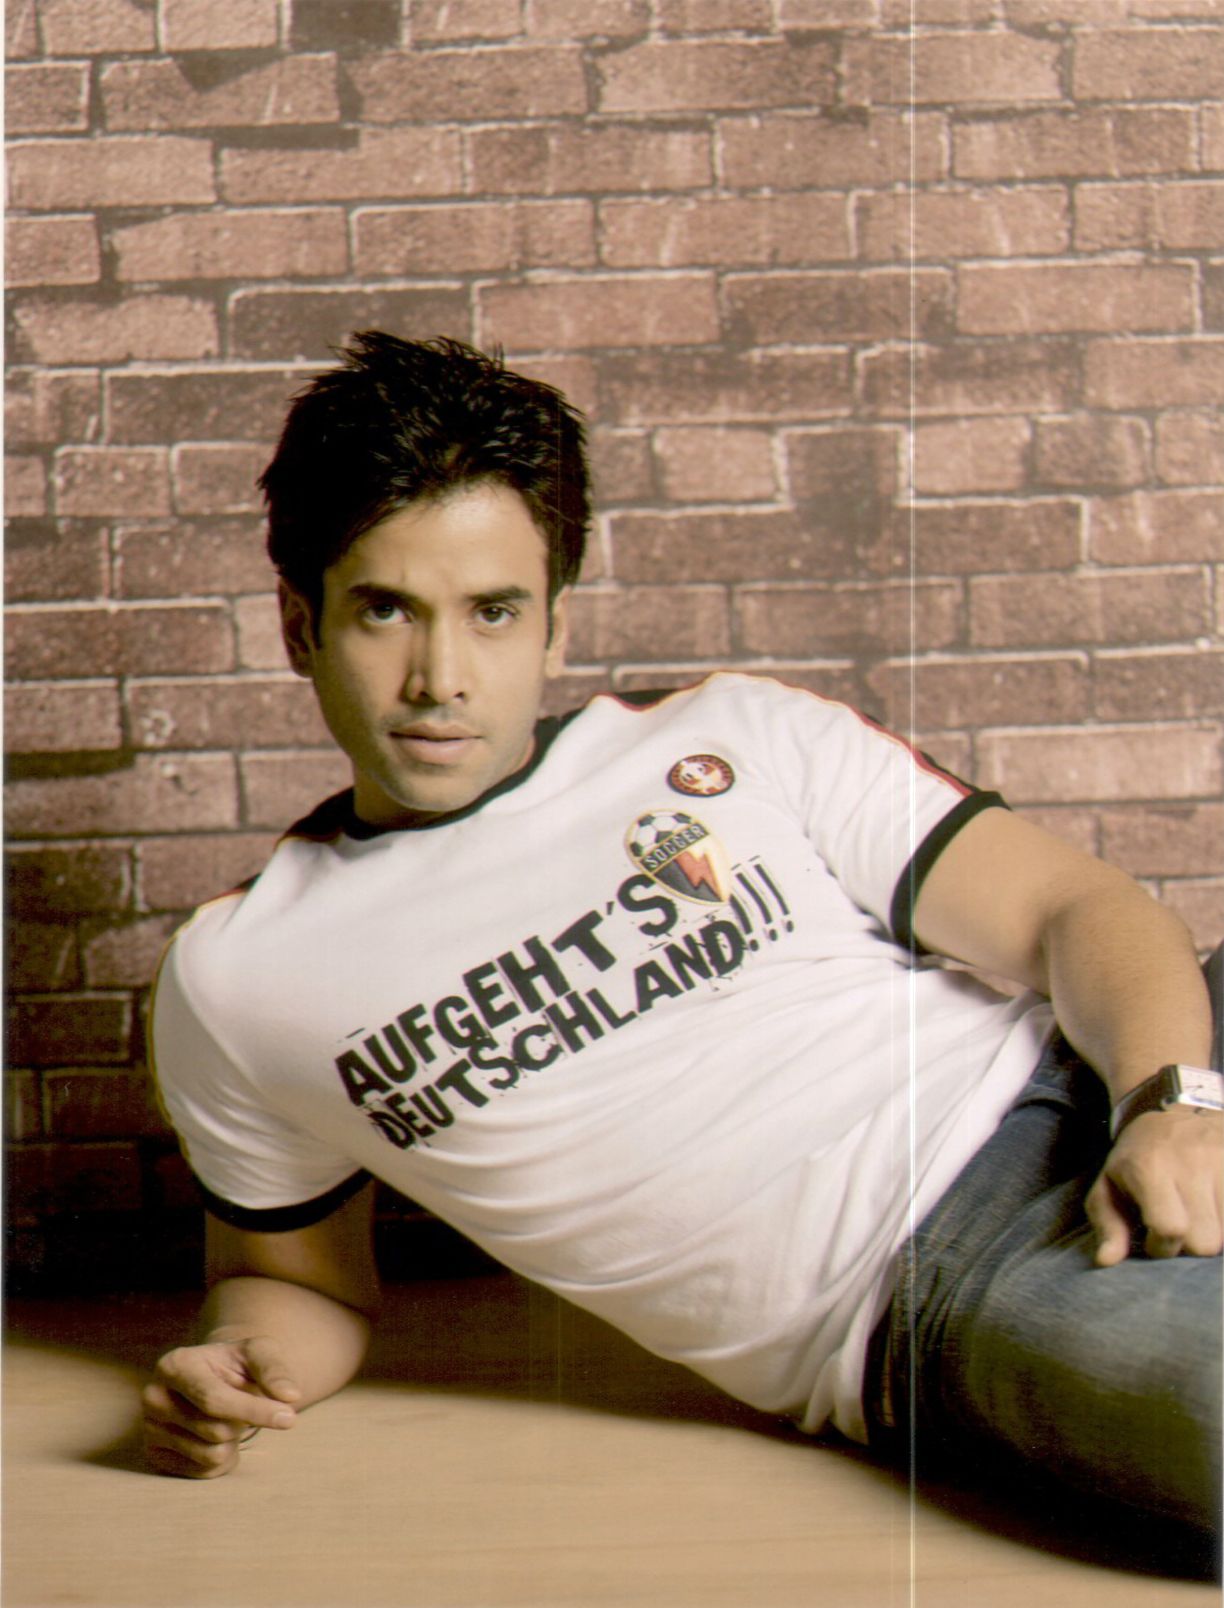 Knock yourself out,Tusshar Kapoor.